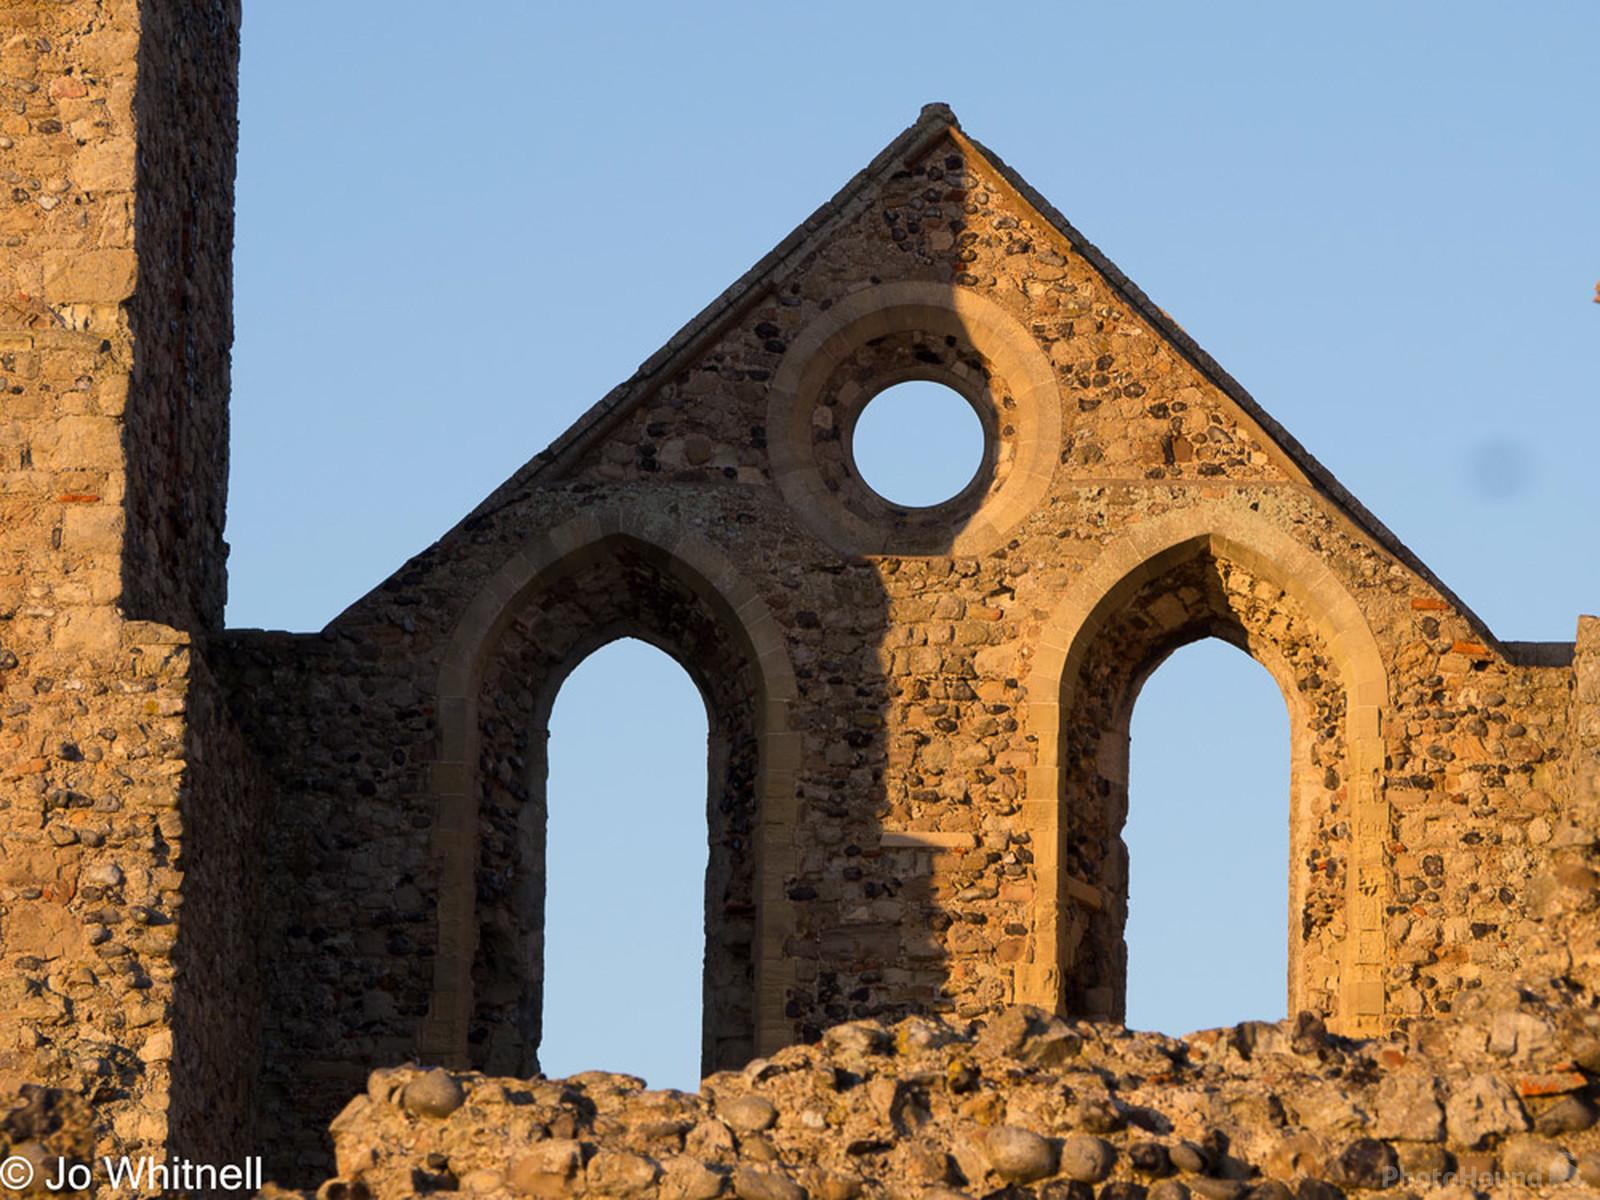 Image of Reculver Towers by Jo Whitnell